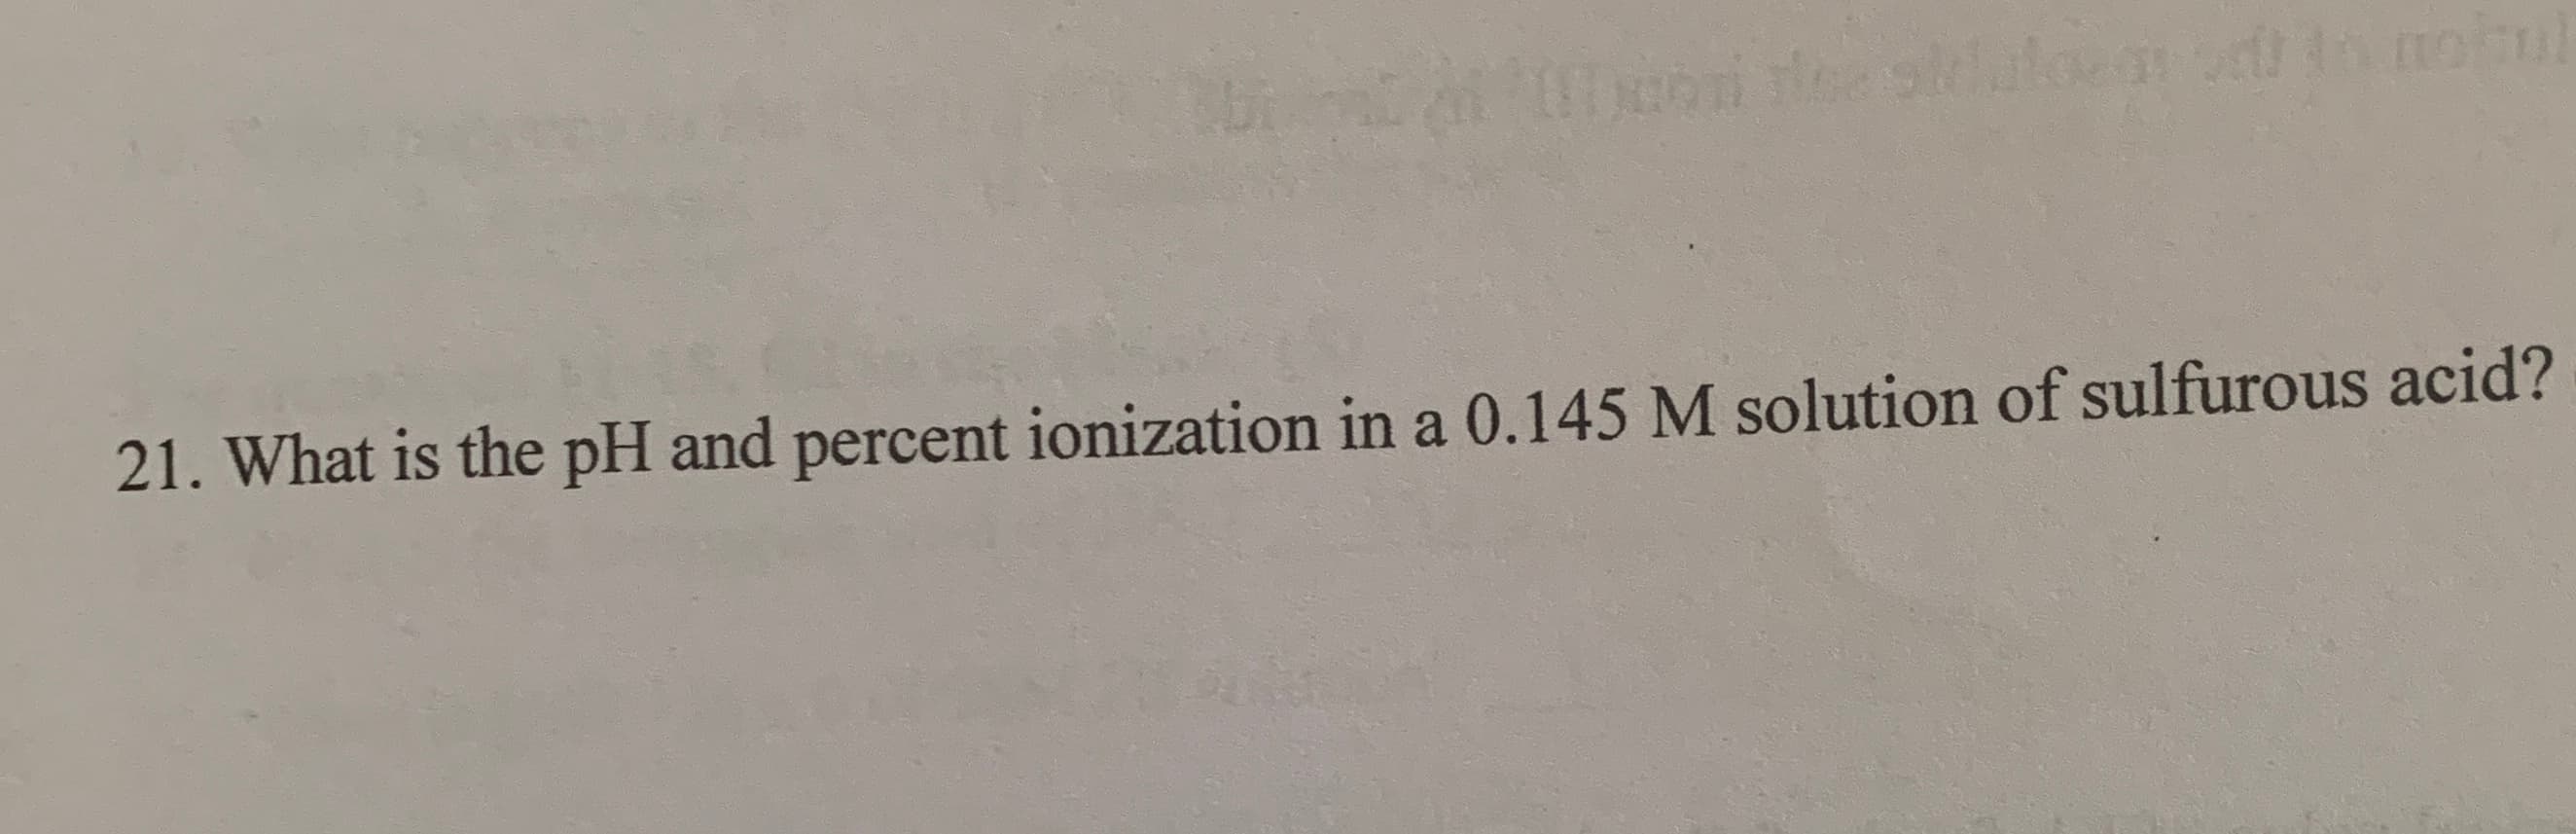 21. What is the pH and percent ionization in a 0.145 M solution of sulfurous acid?
